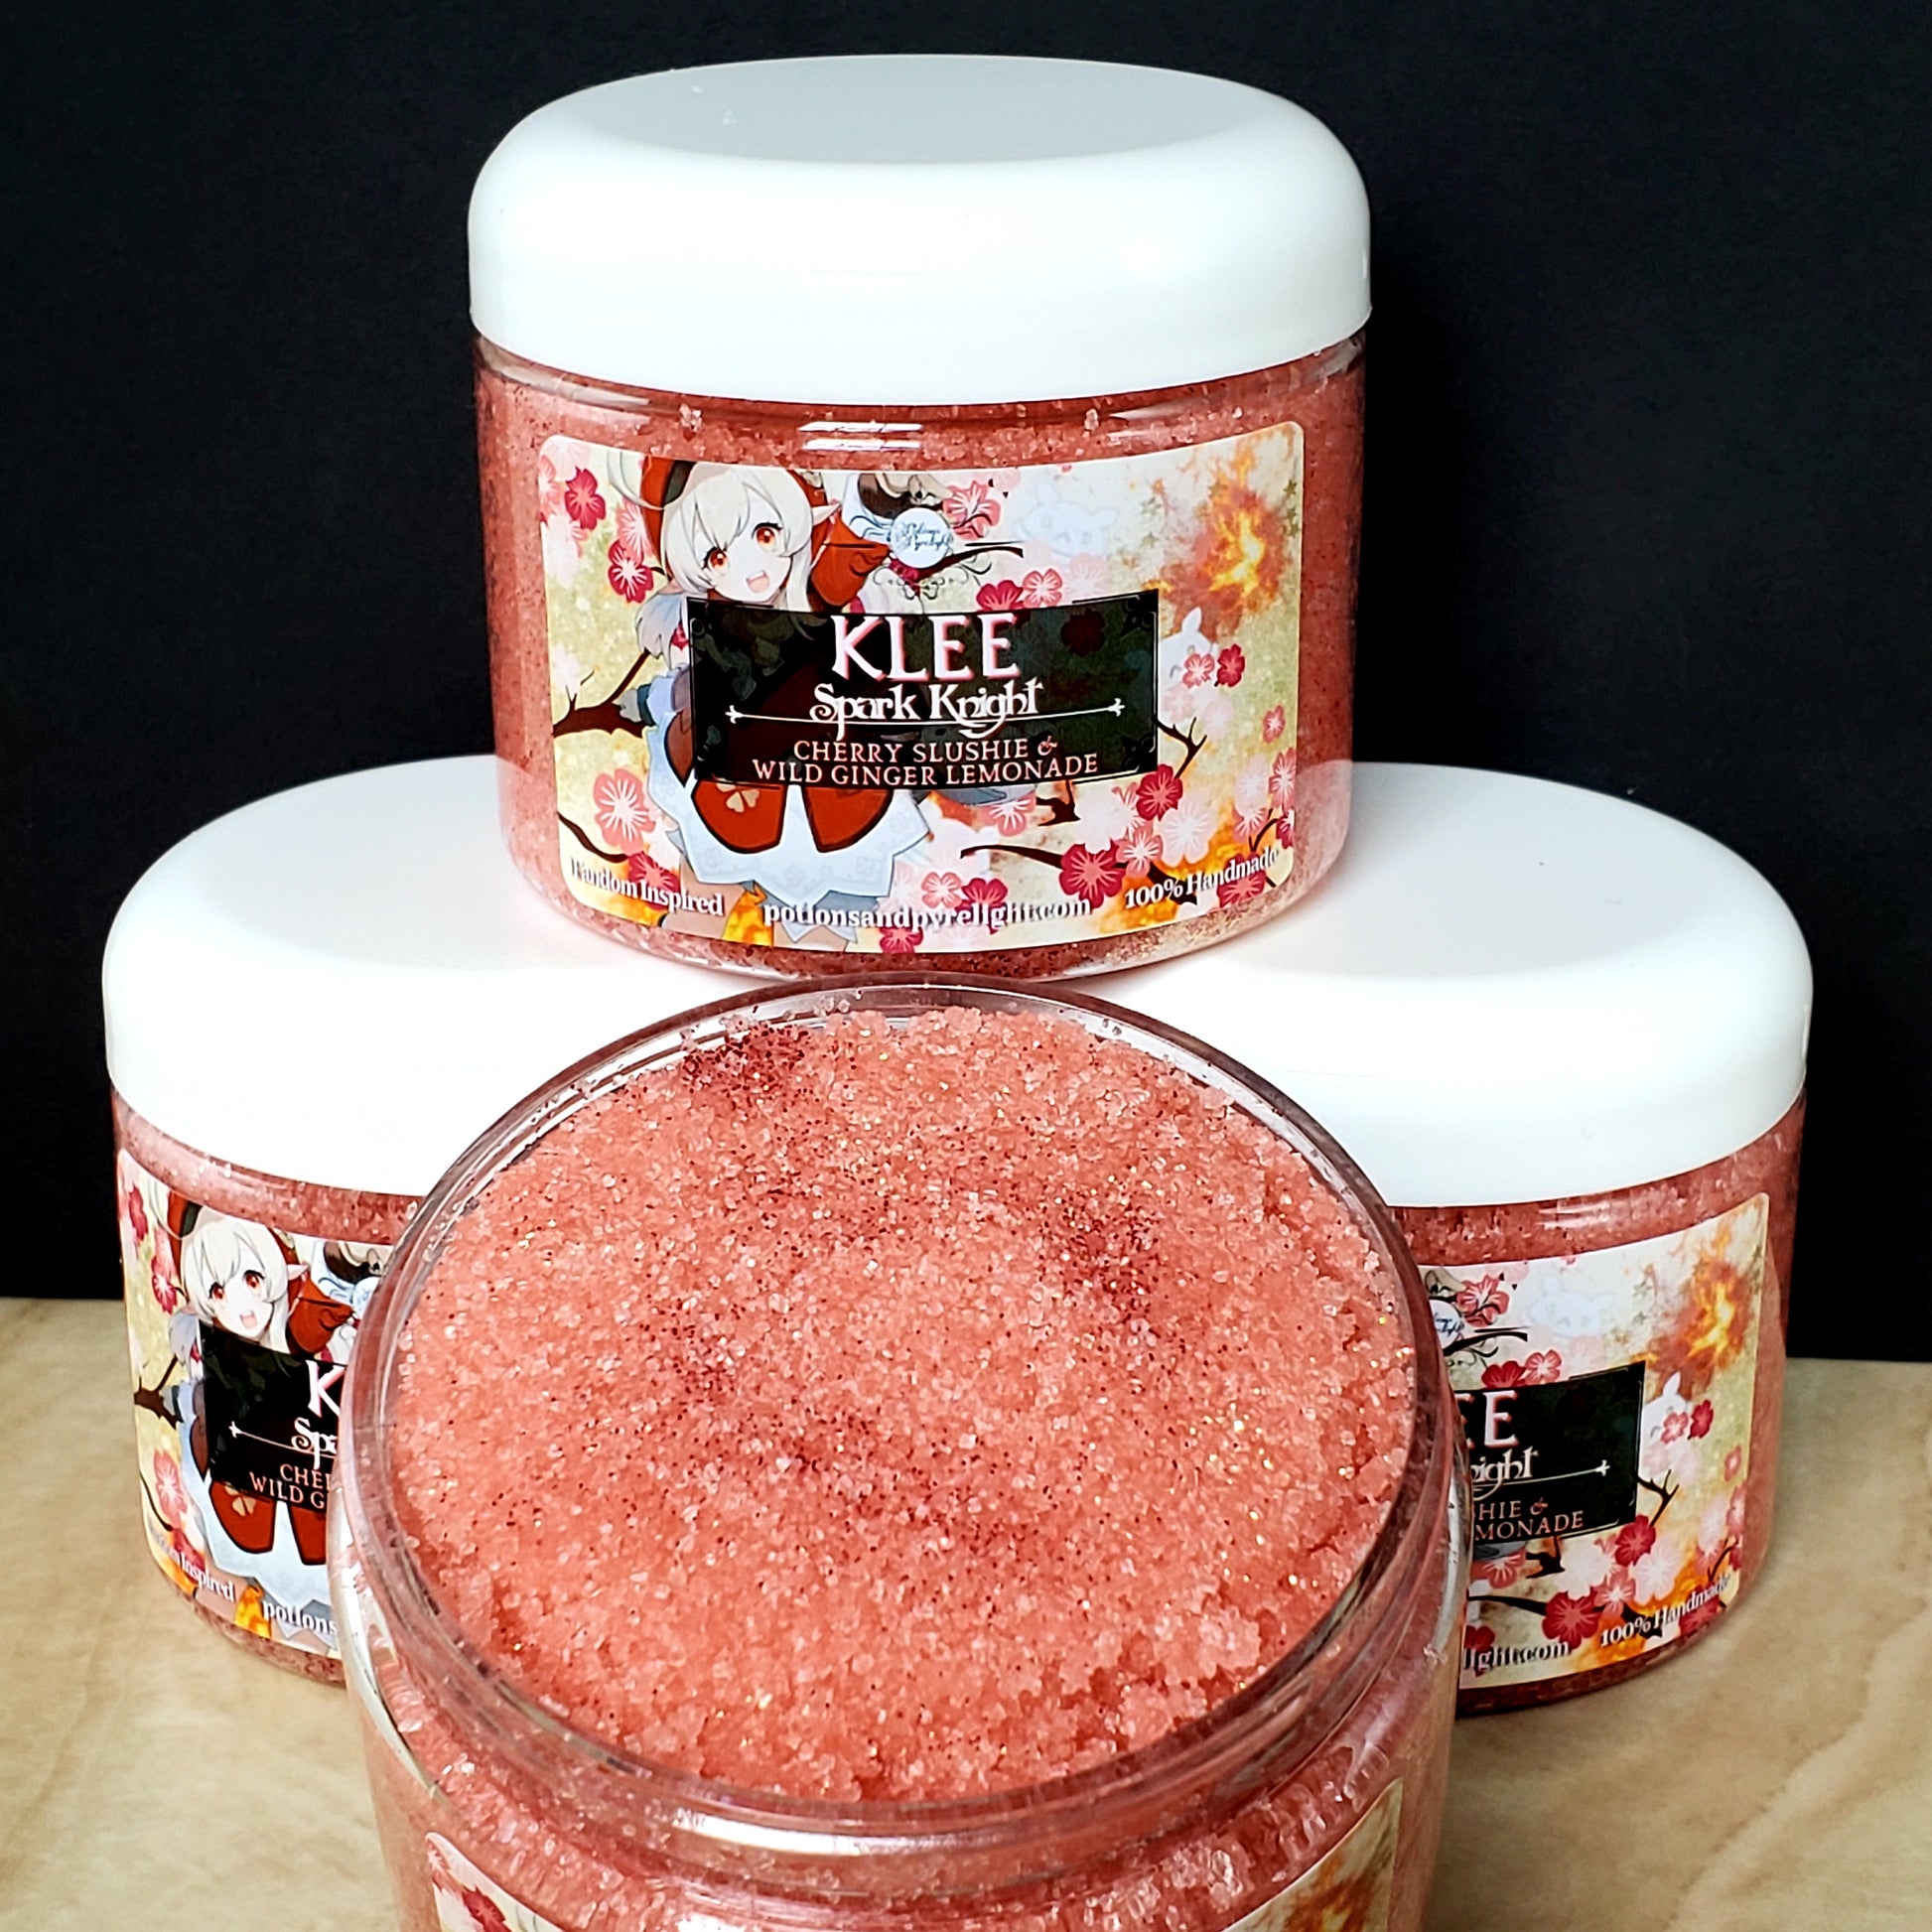 Genshin Impact - Klee Exfoliating Sugar Polish (Summer 2021 Limited Release) - Potions & Pyrelight